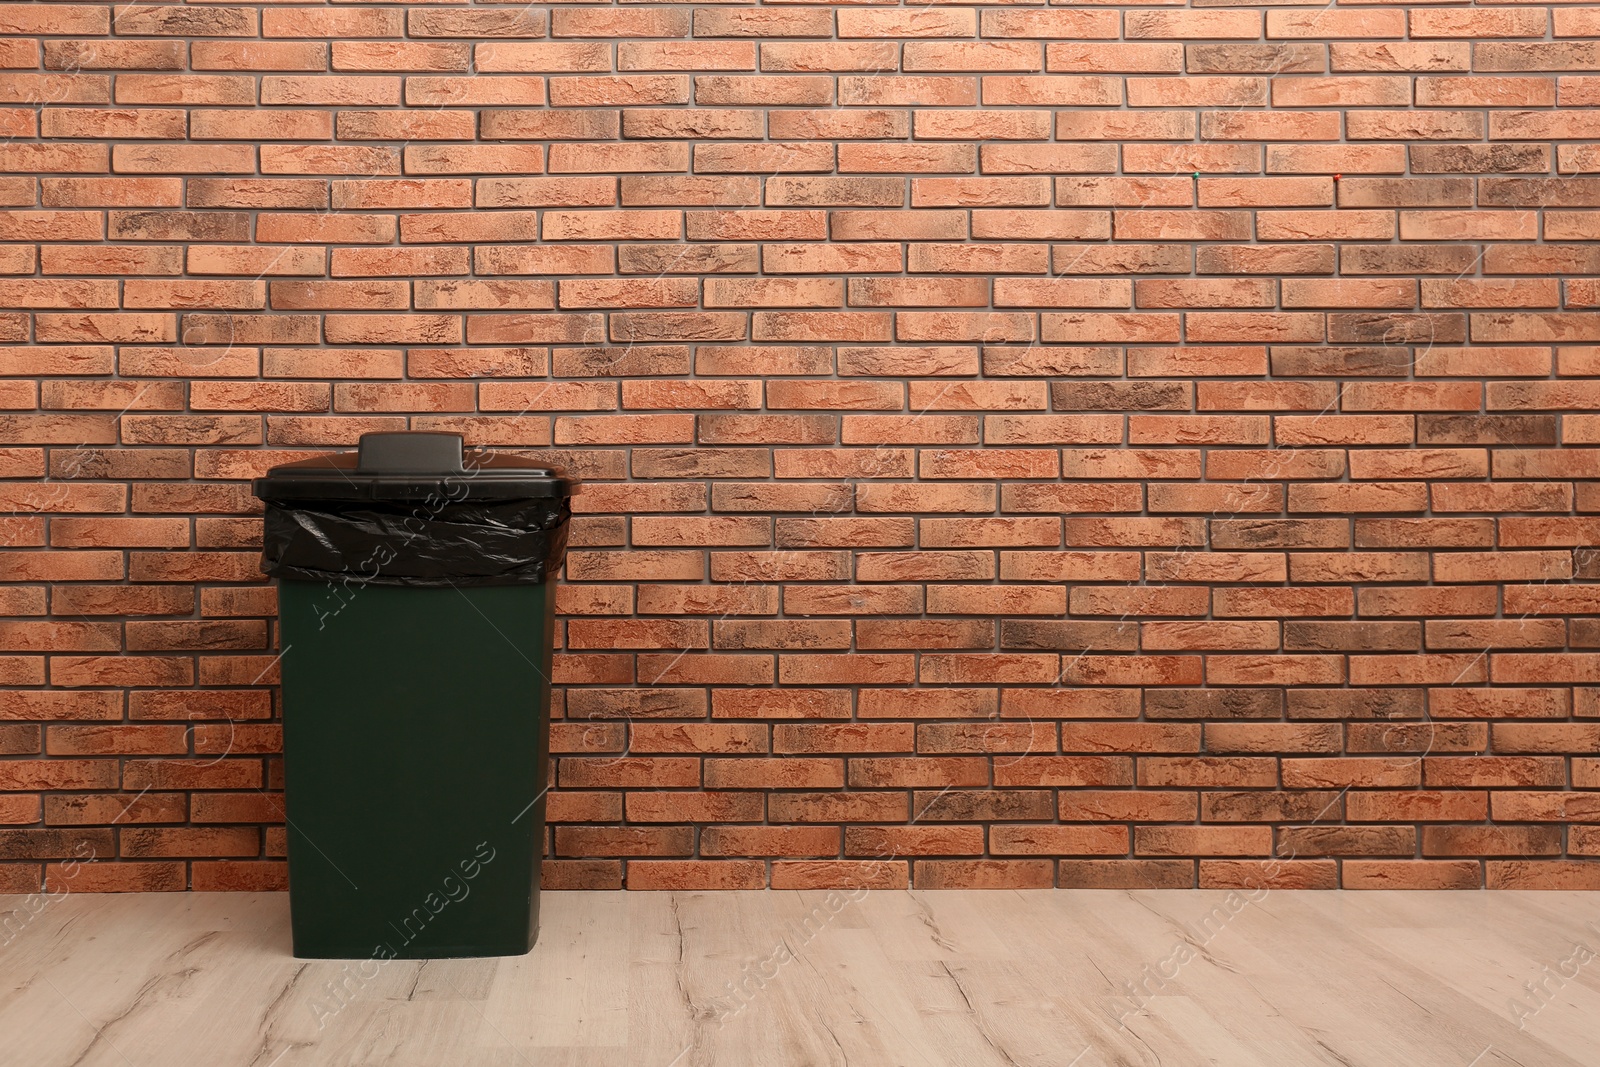 Photo of Closed trash bin near brick wall indoors, space for text. Waste recycling